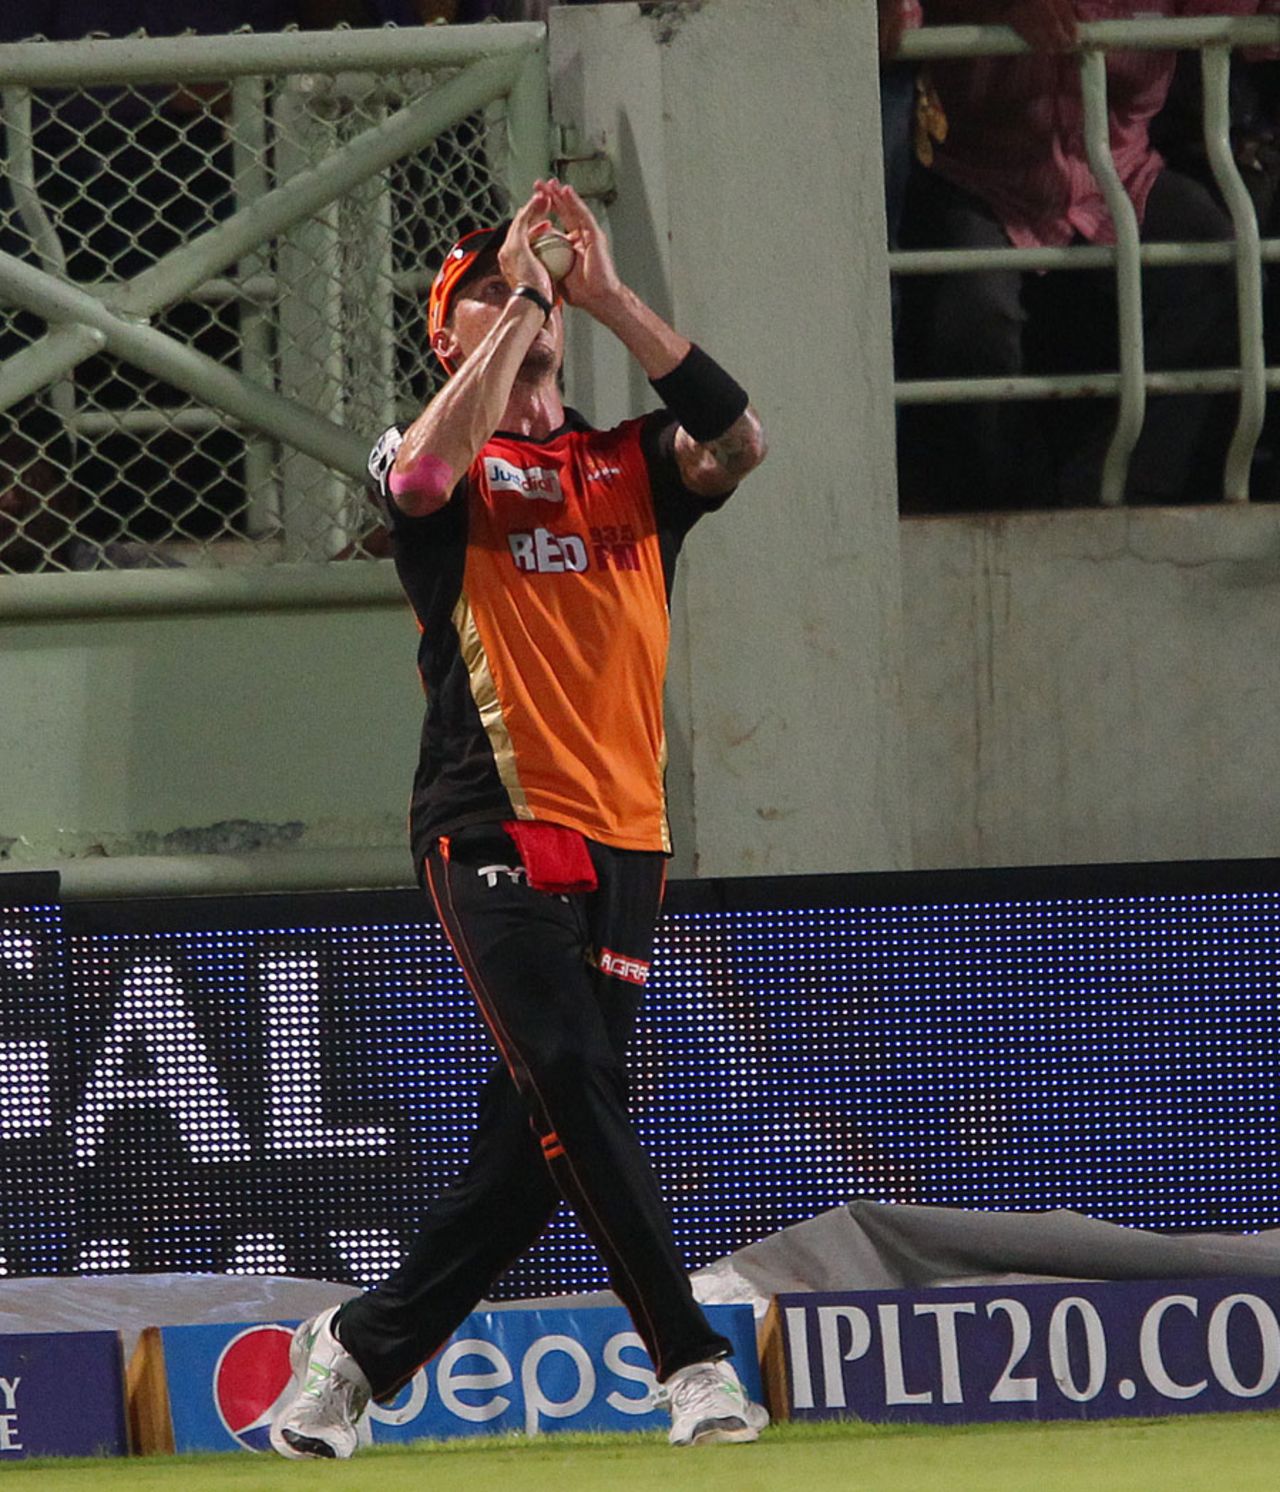 Dale Steyn catches Andre Russell at the boundary, Sunrisers Hyderabad v Kolkata Knight Riders, IPL 2015, Vizag, April 22, 2015